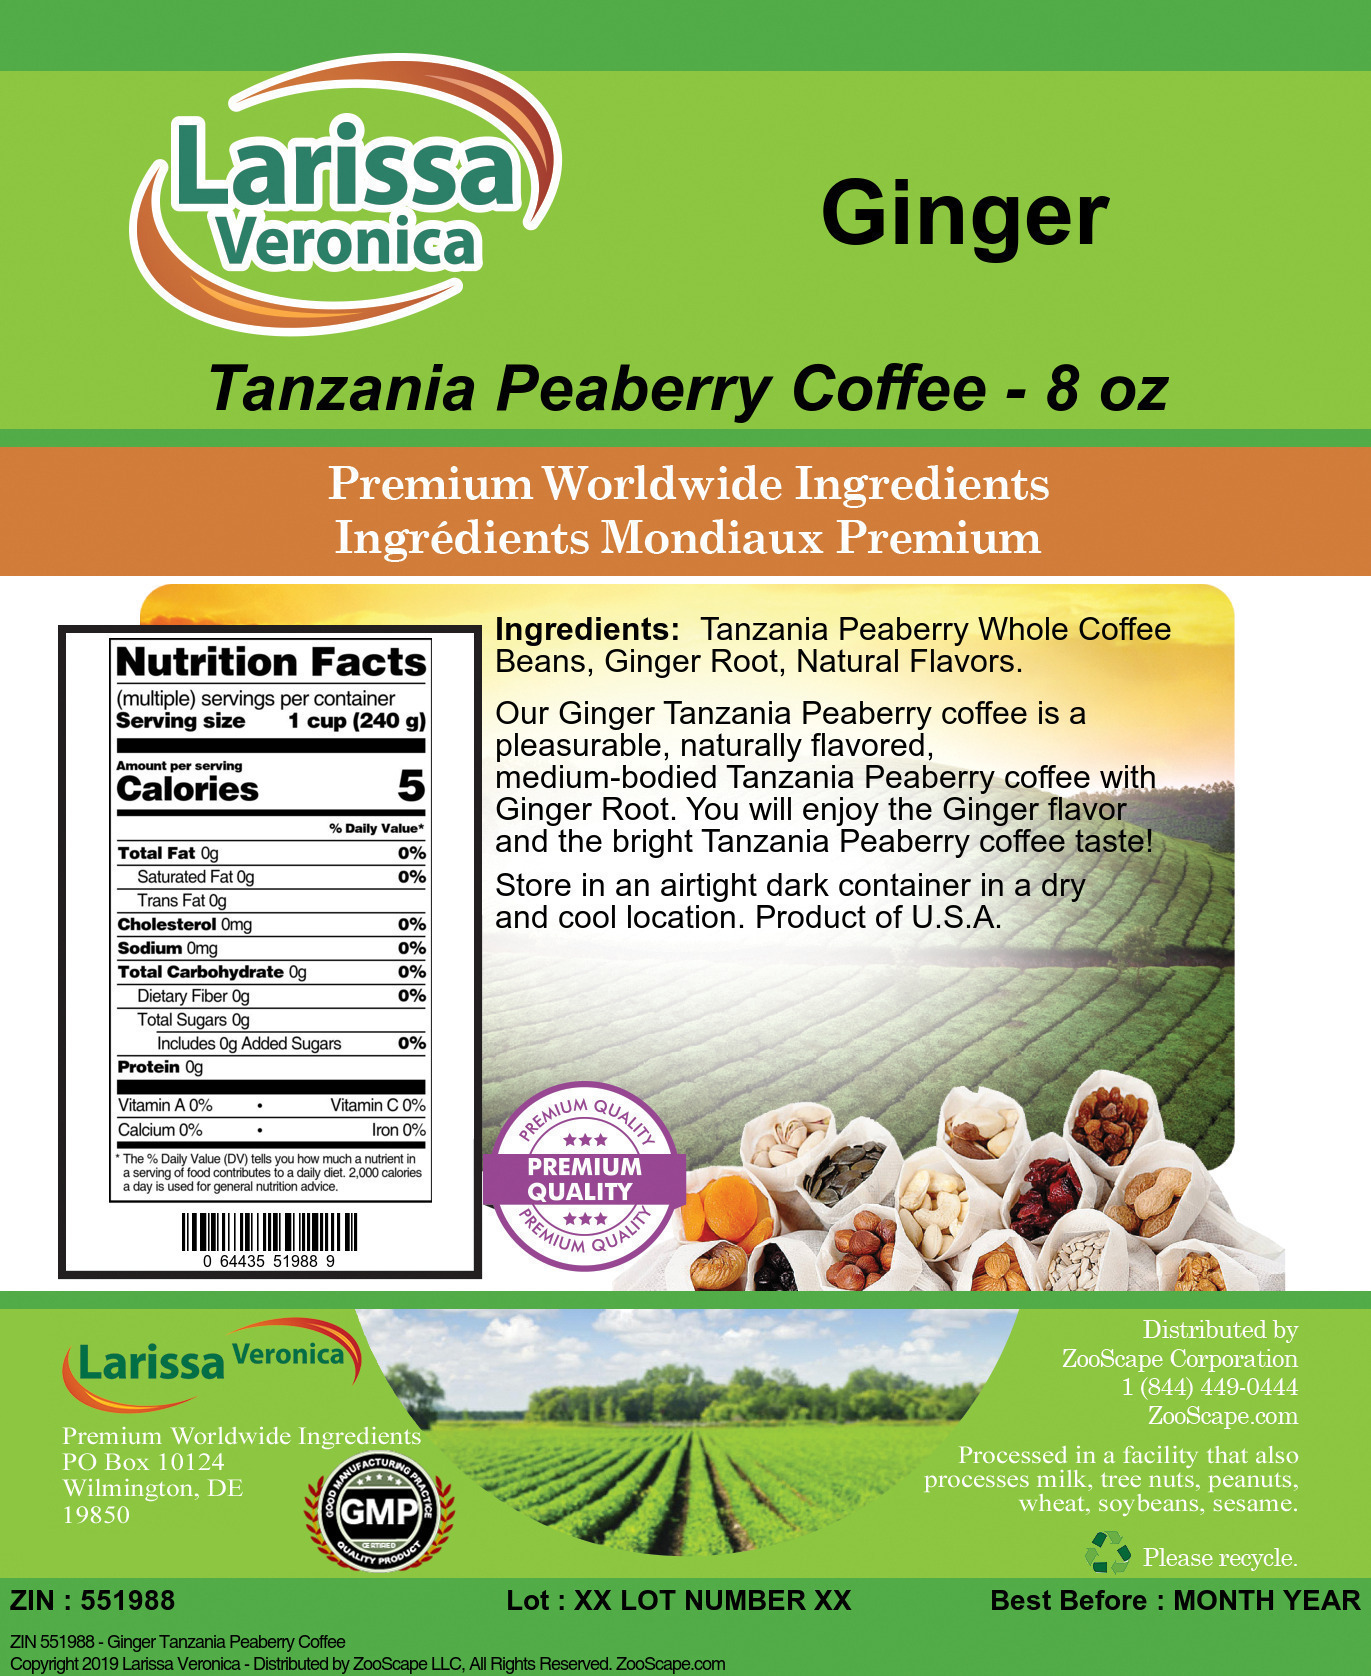 Ginger Tanzania Peaberry Coffee - Label